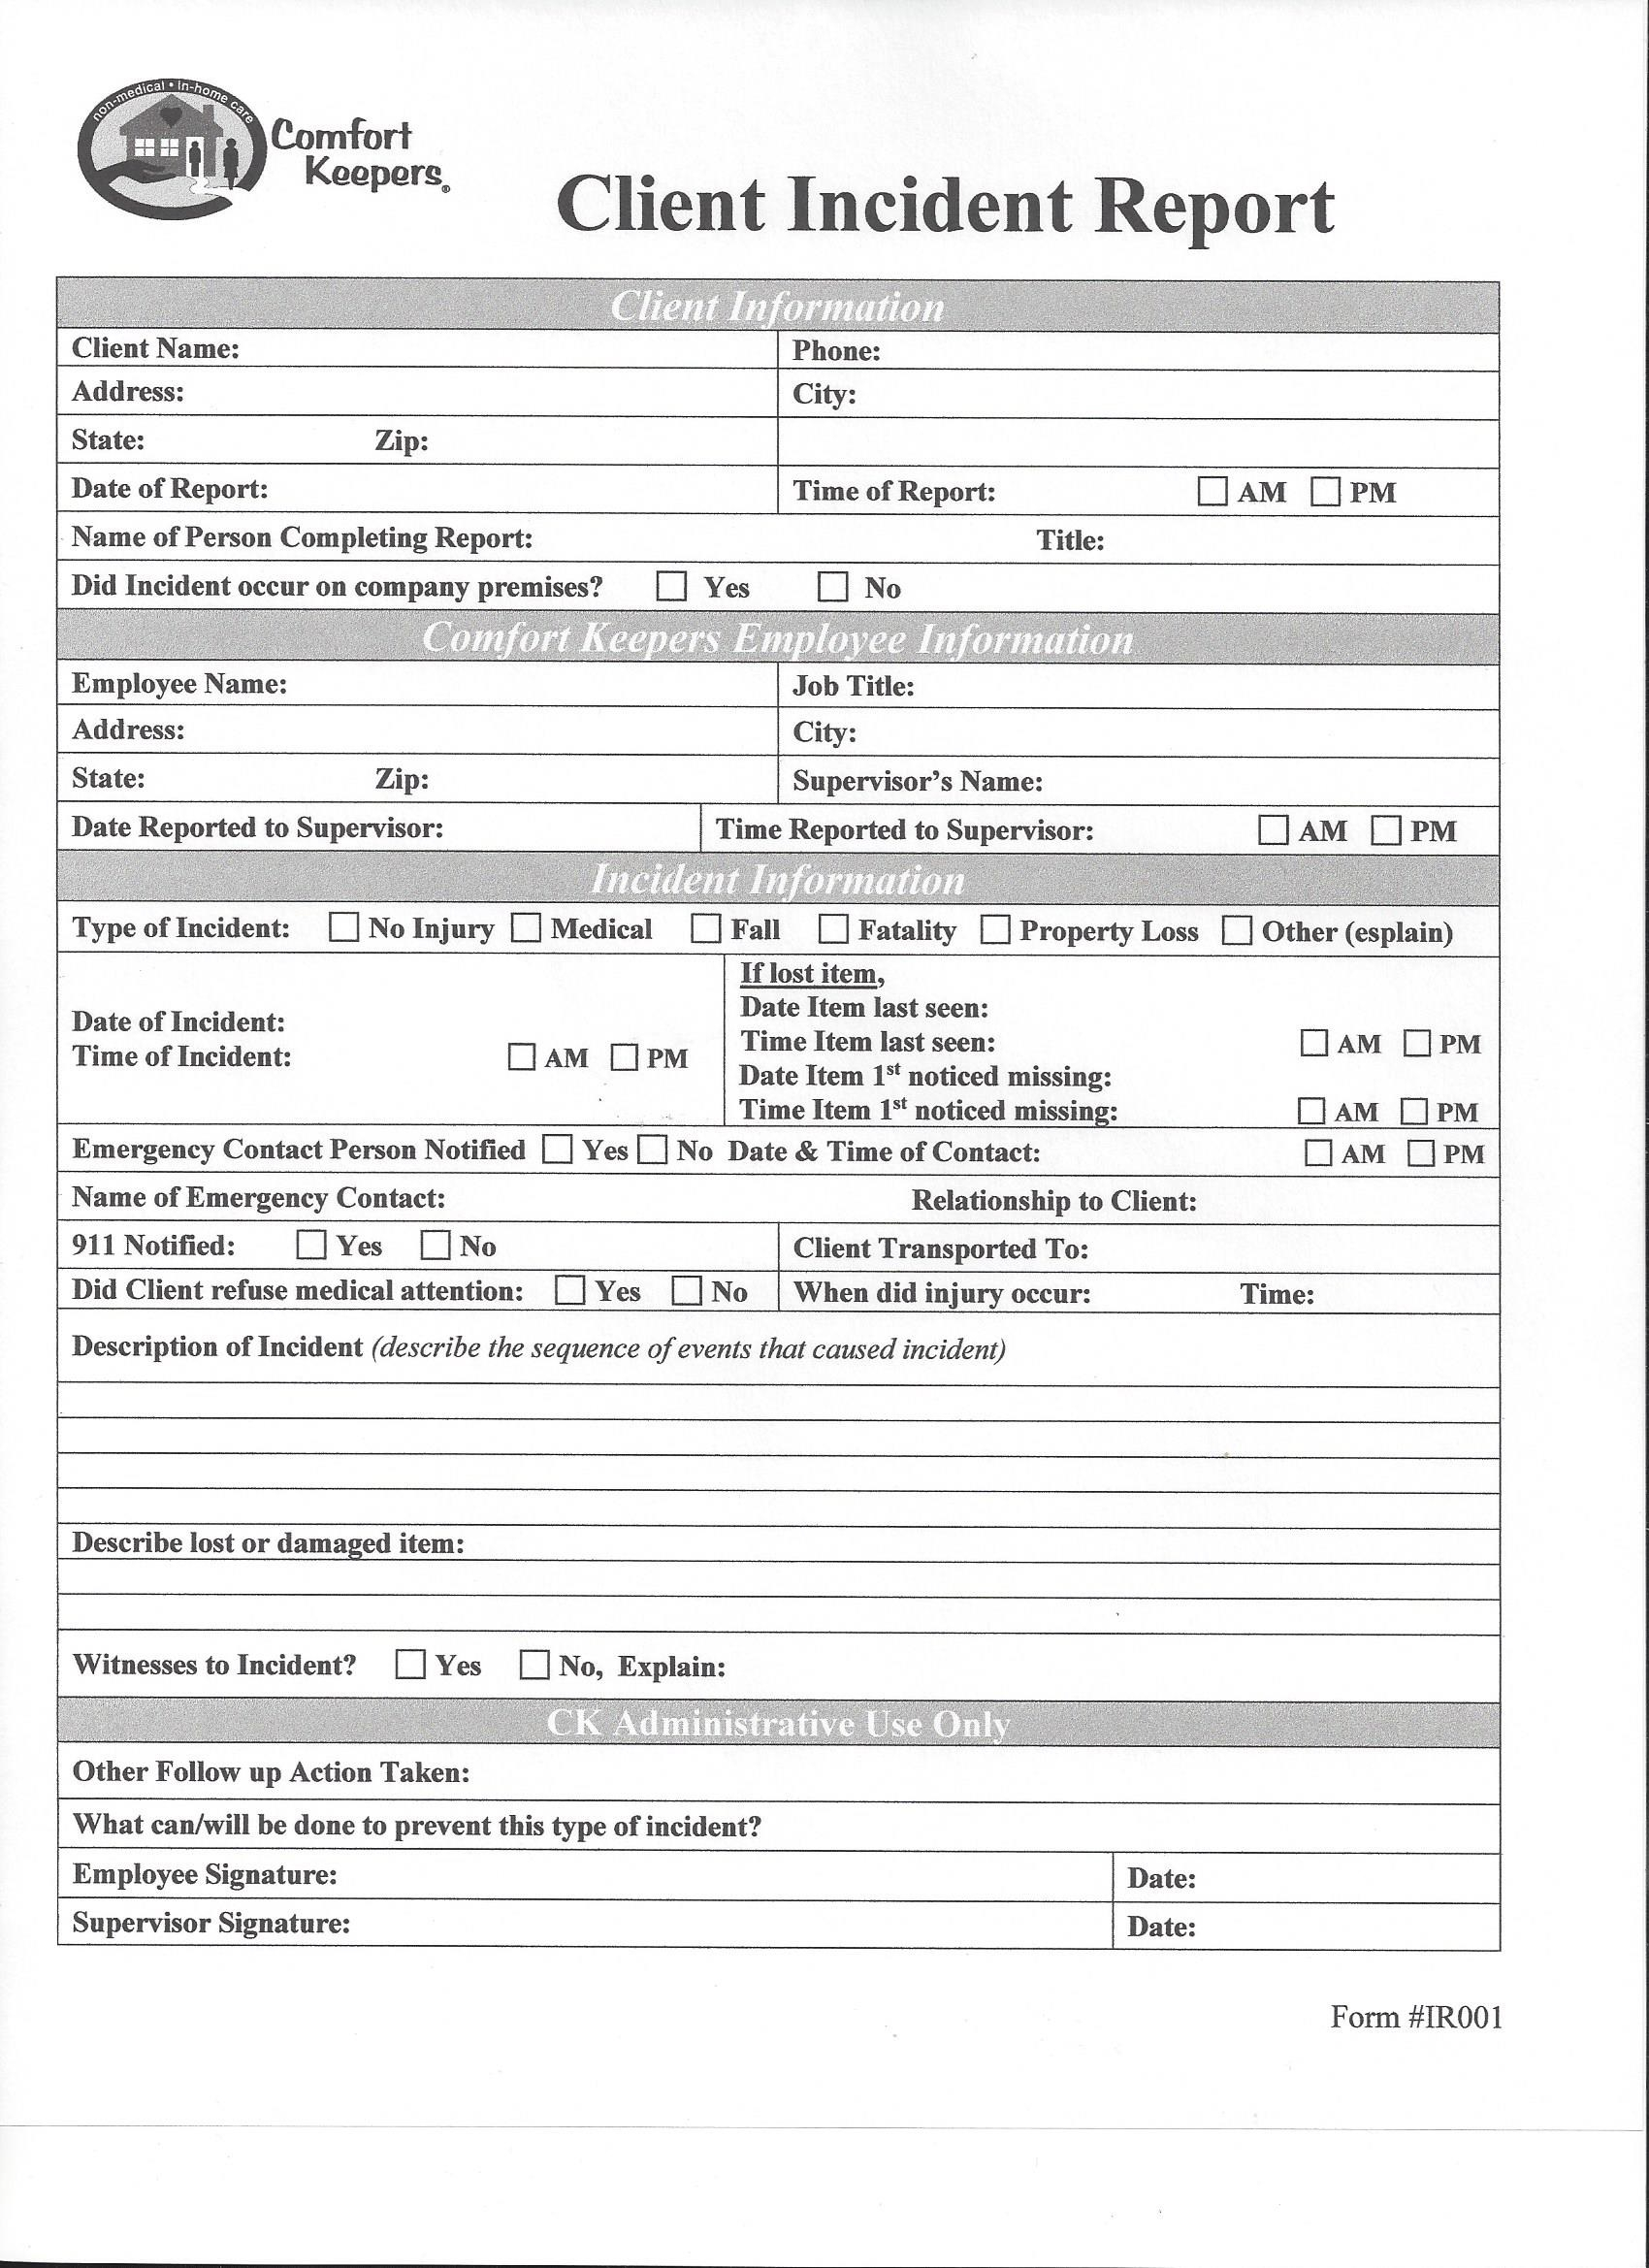 Comfort Keepers Employee Website With Customer Incident Report Form Template